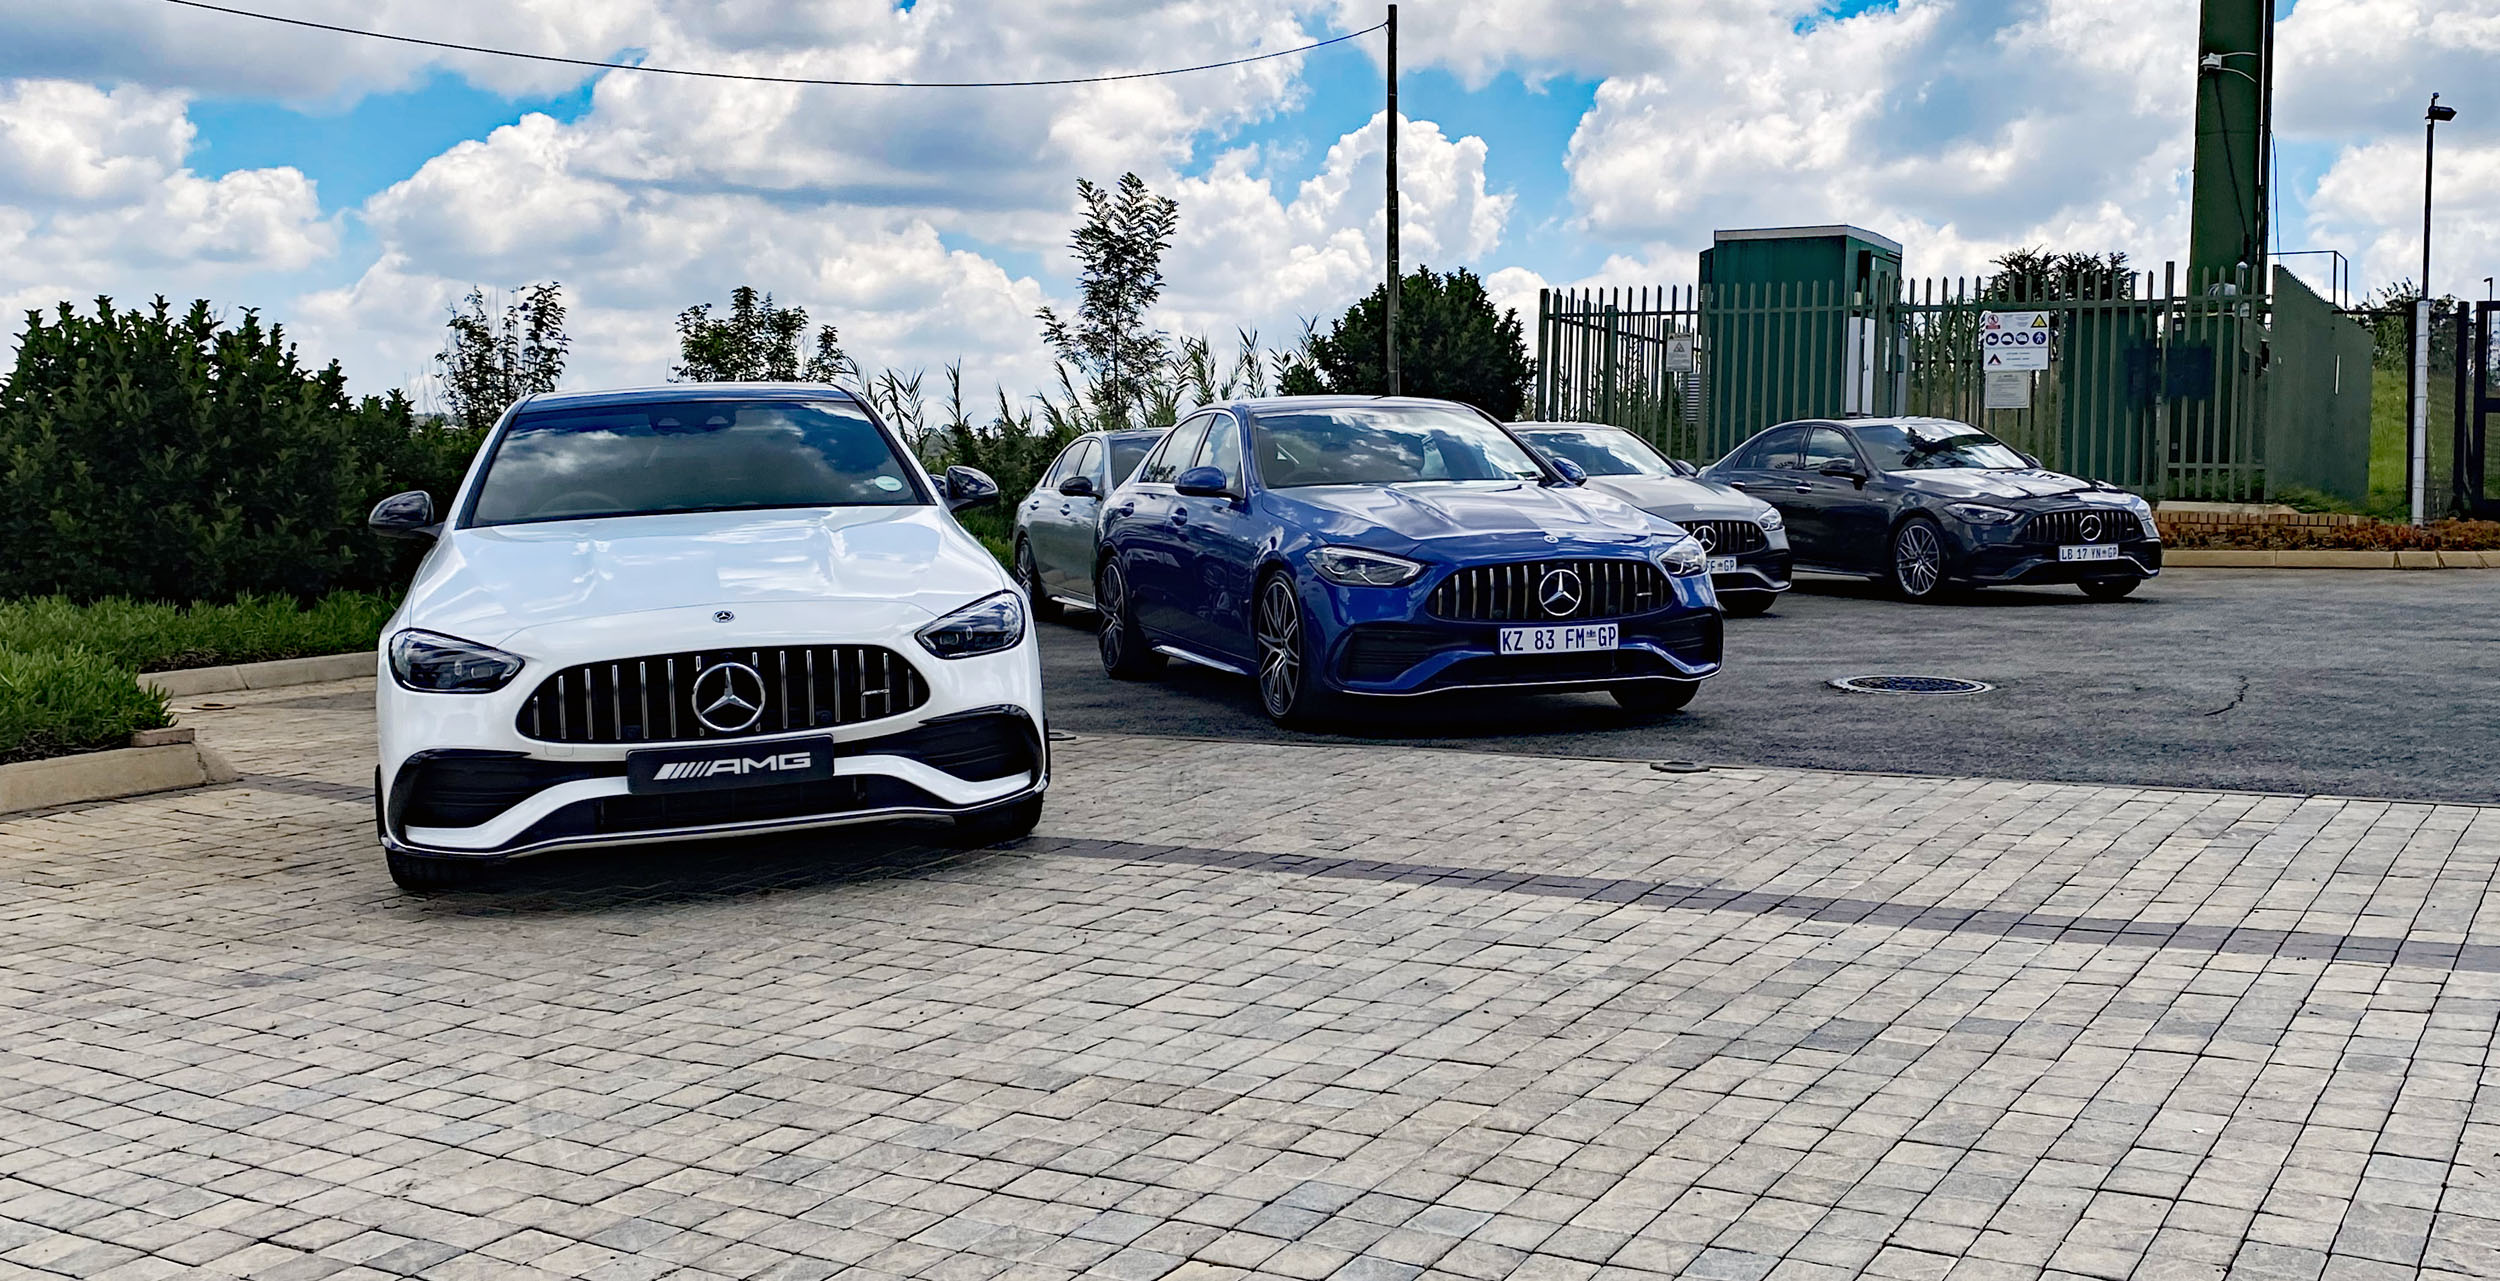 mercedes-amg, mercedes-amg c43, mercedes-benz, driving the new mercedes-amg c43 in south africa – best and worst parts